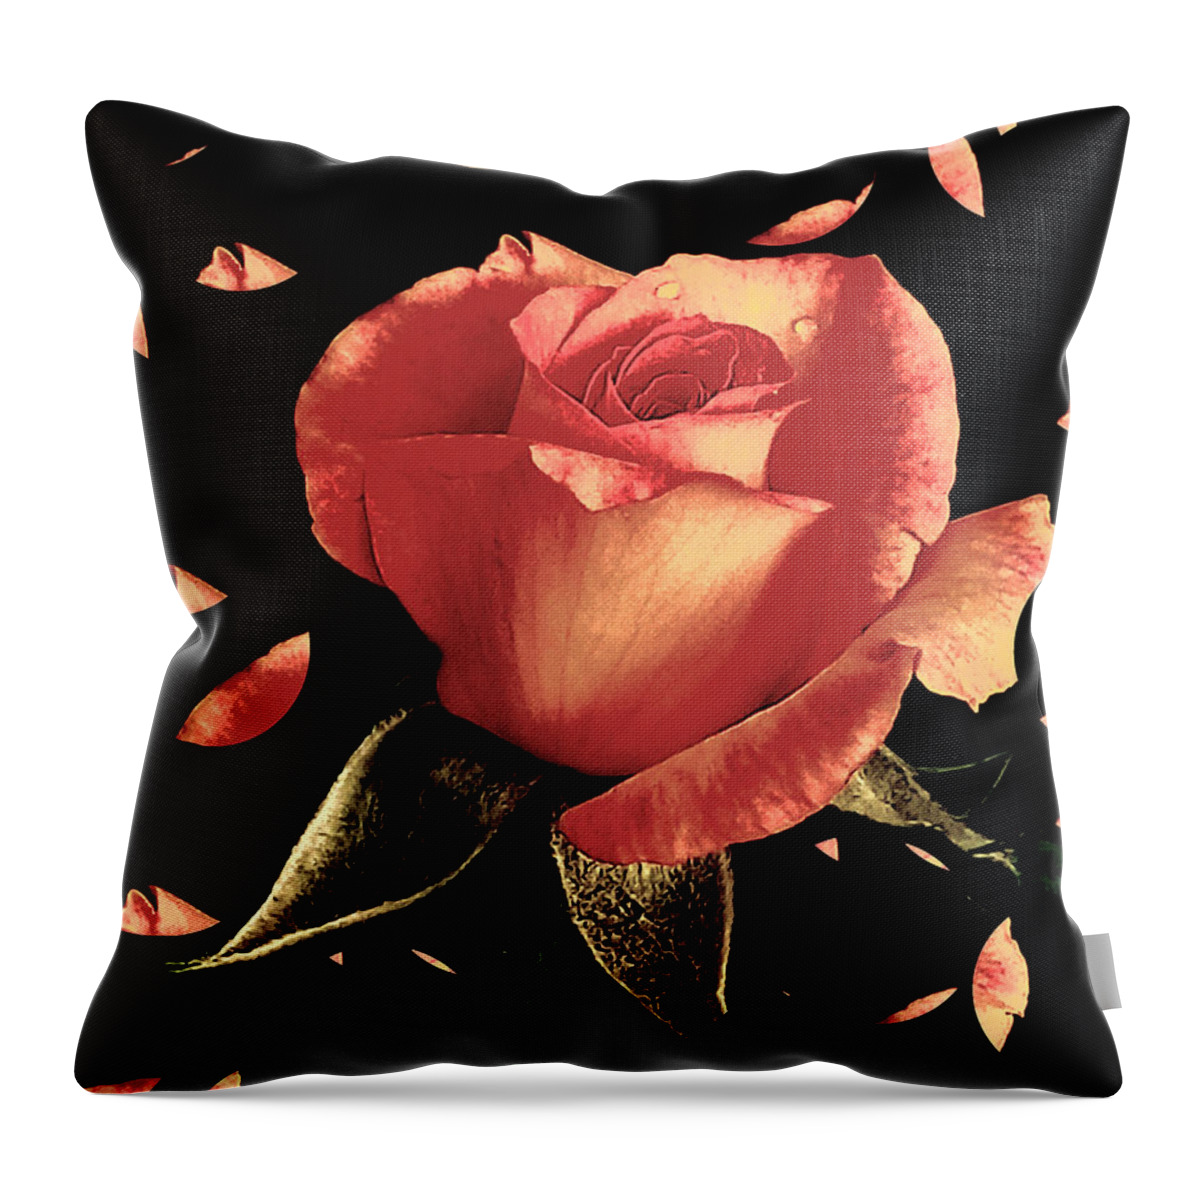 Rose Throw Pillow featuring the photograph Rose Petals by Dani McEvoy